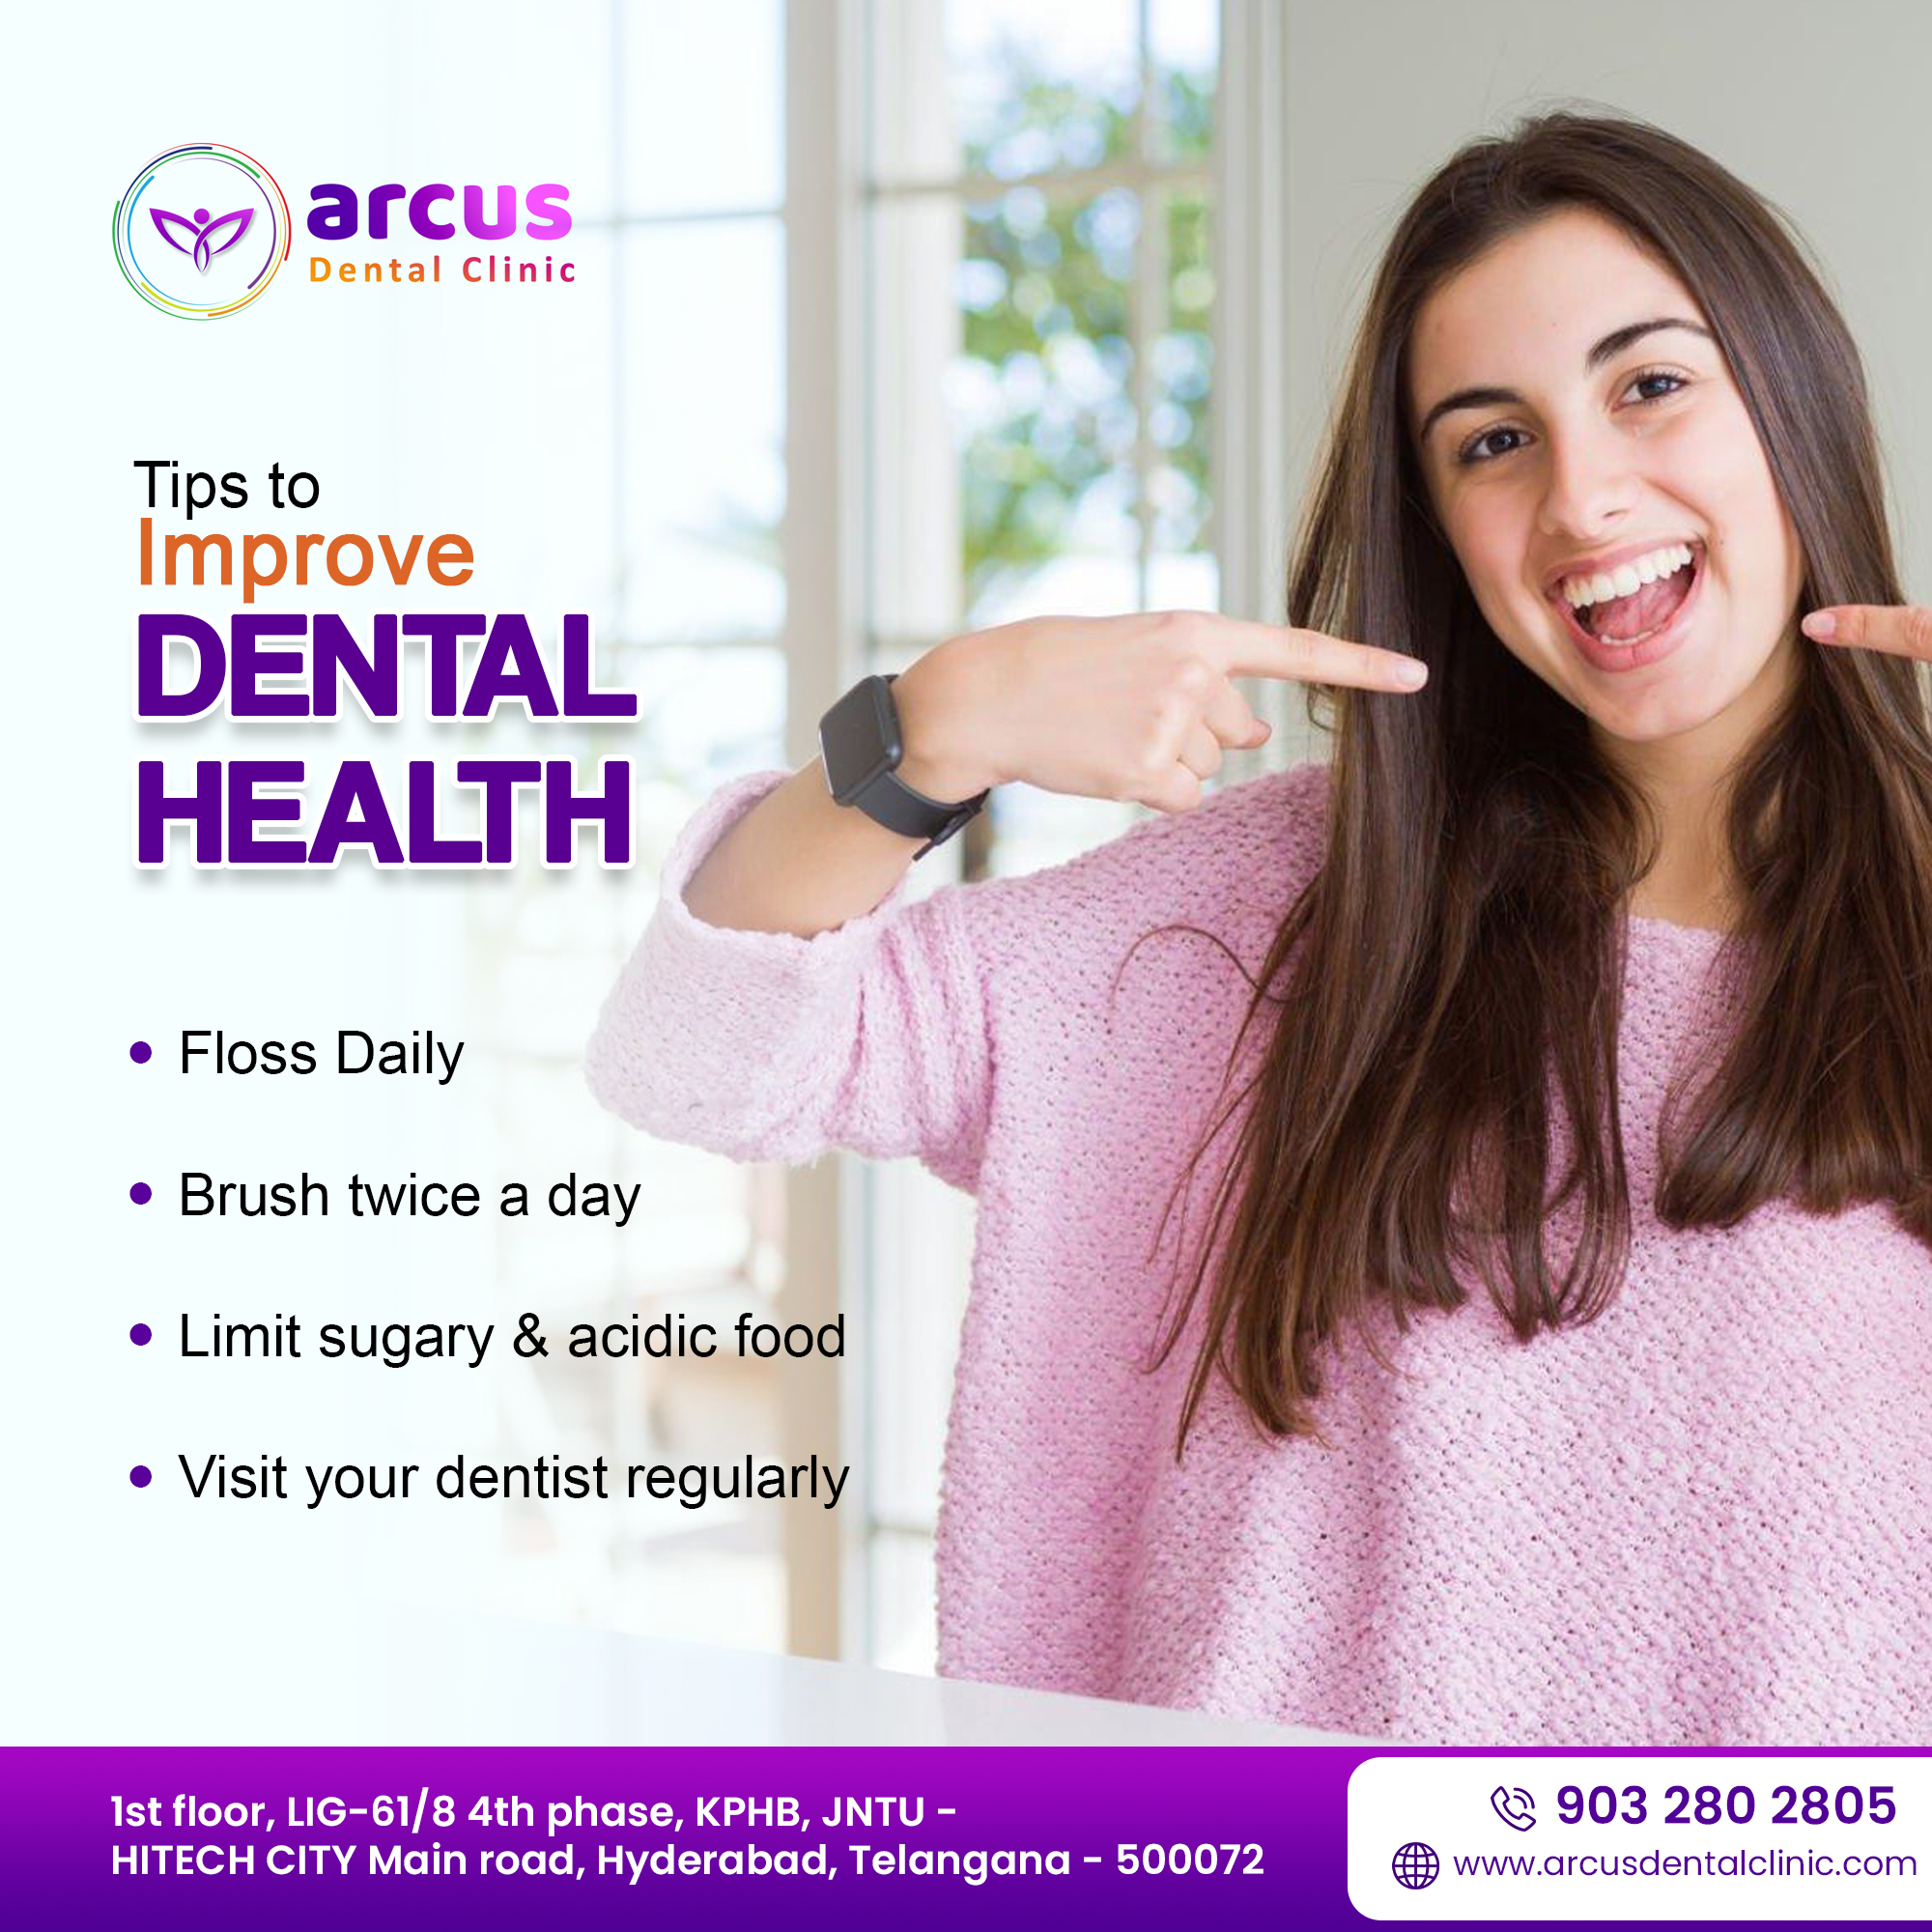 Top 5 Dental Tips For Your Oral Health